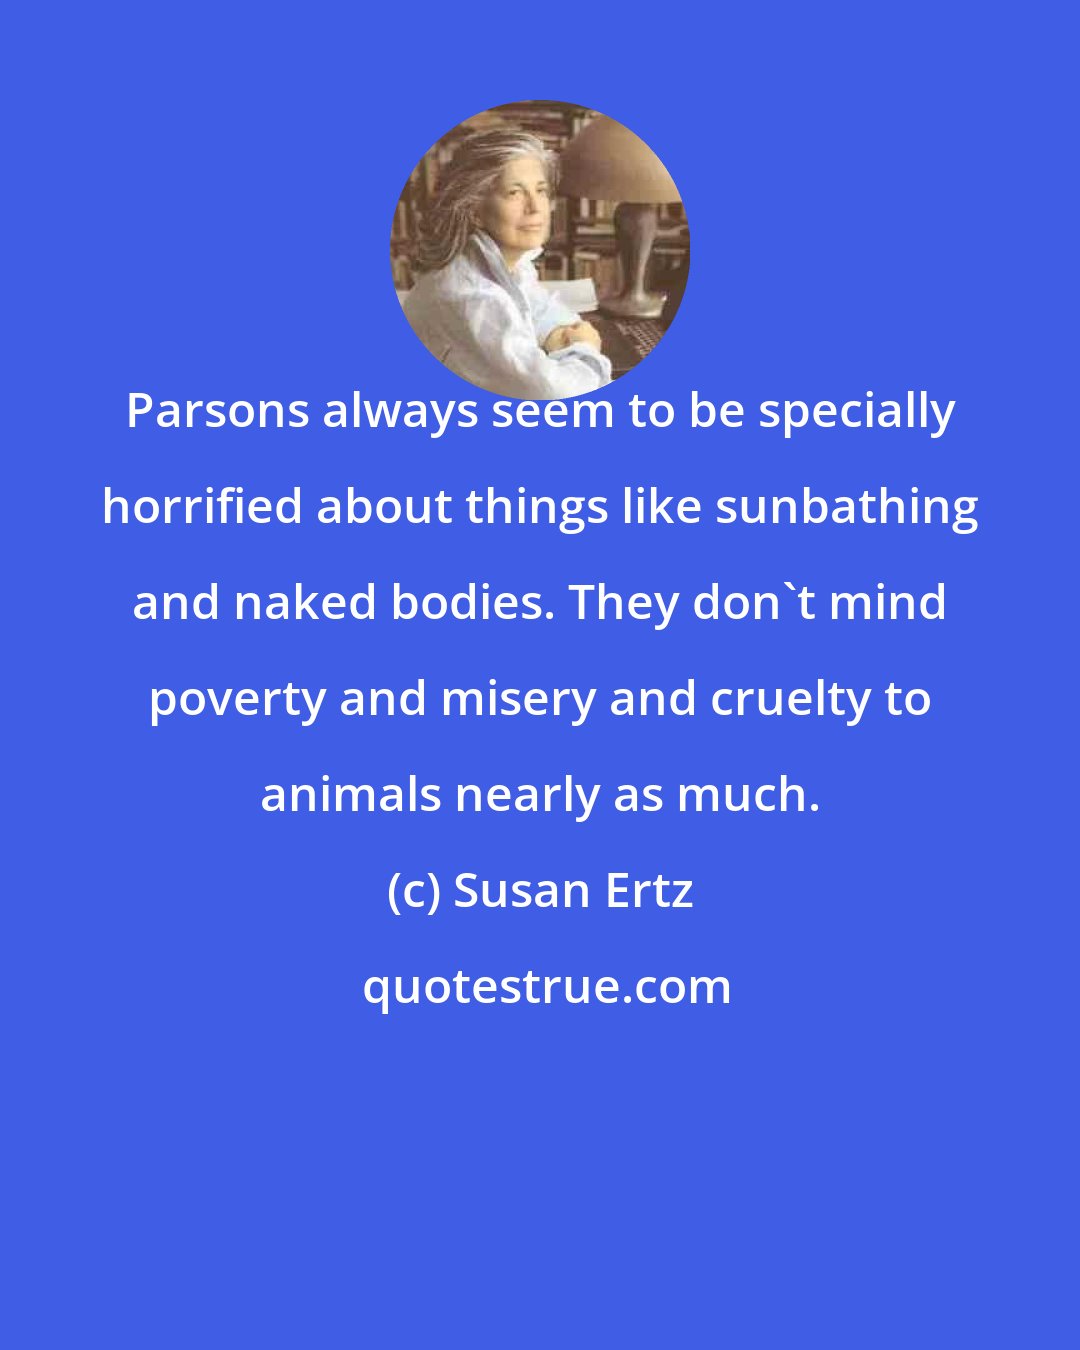 Susan Ertz: Parsons always seem to be specially horrified about things like sunbathing and naked bodies. They don't mind poverty and misery and cruelty to animals nearly as much.